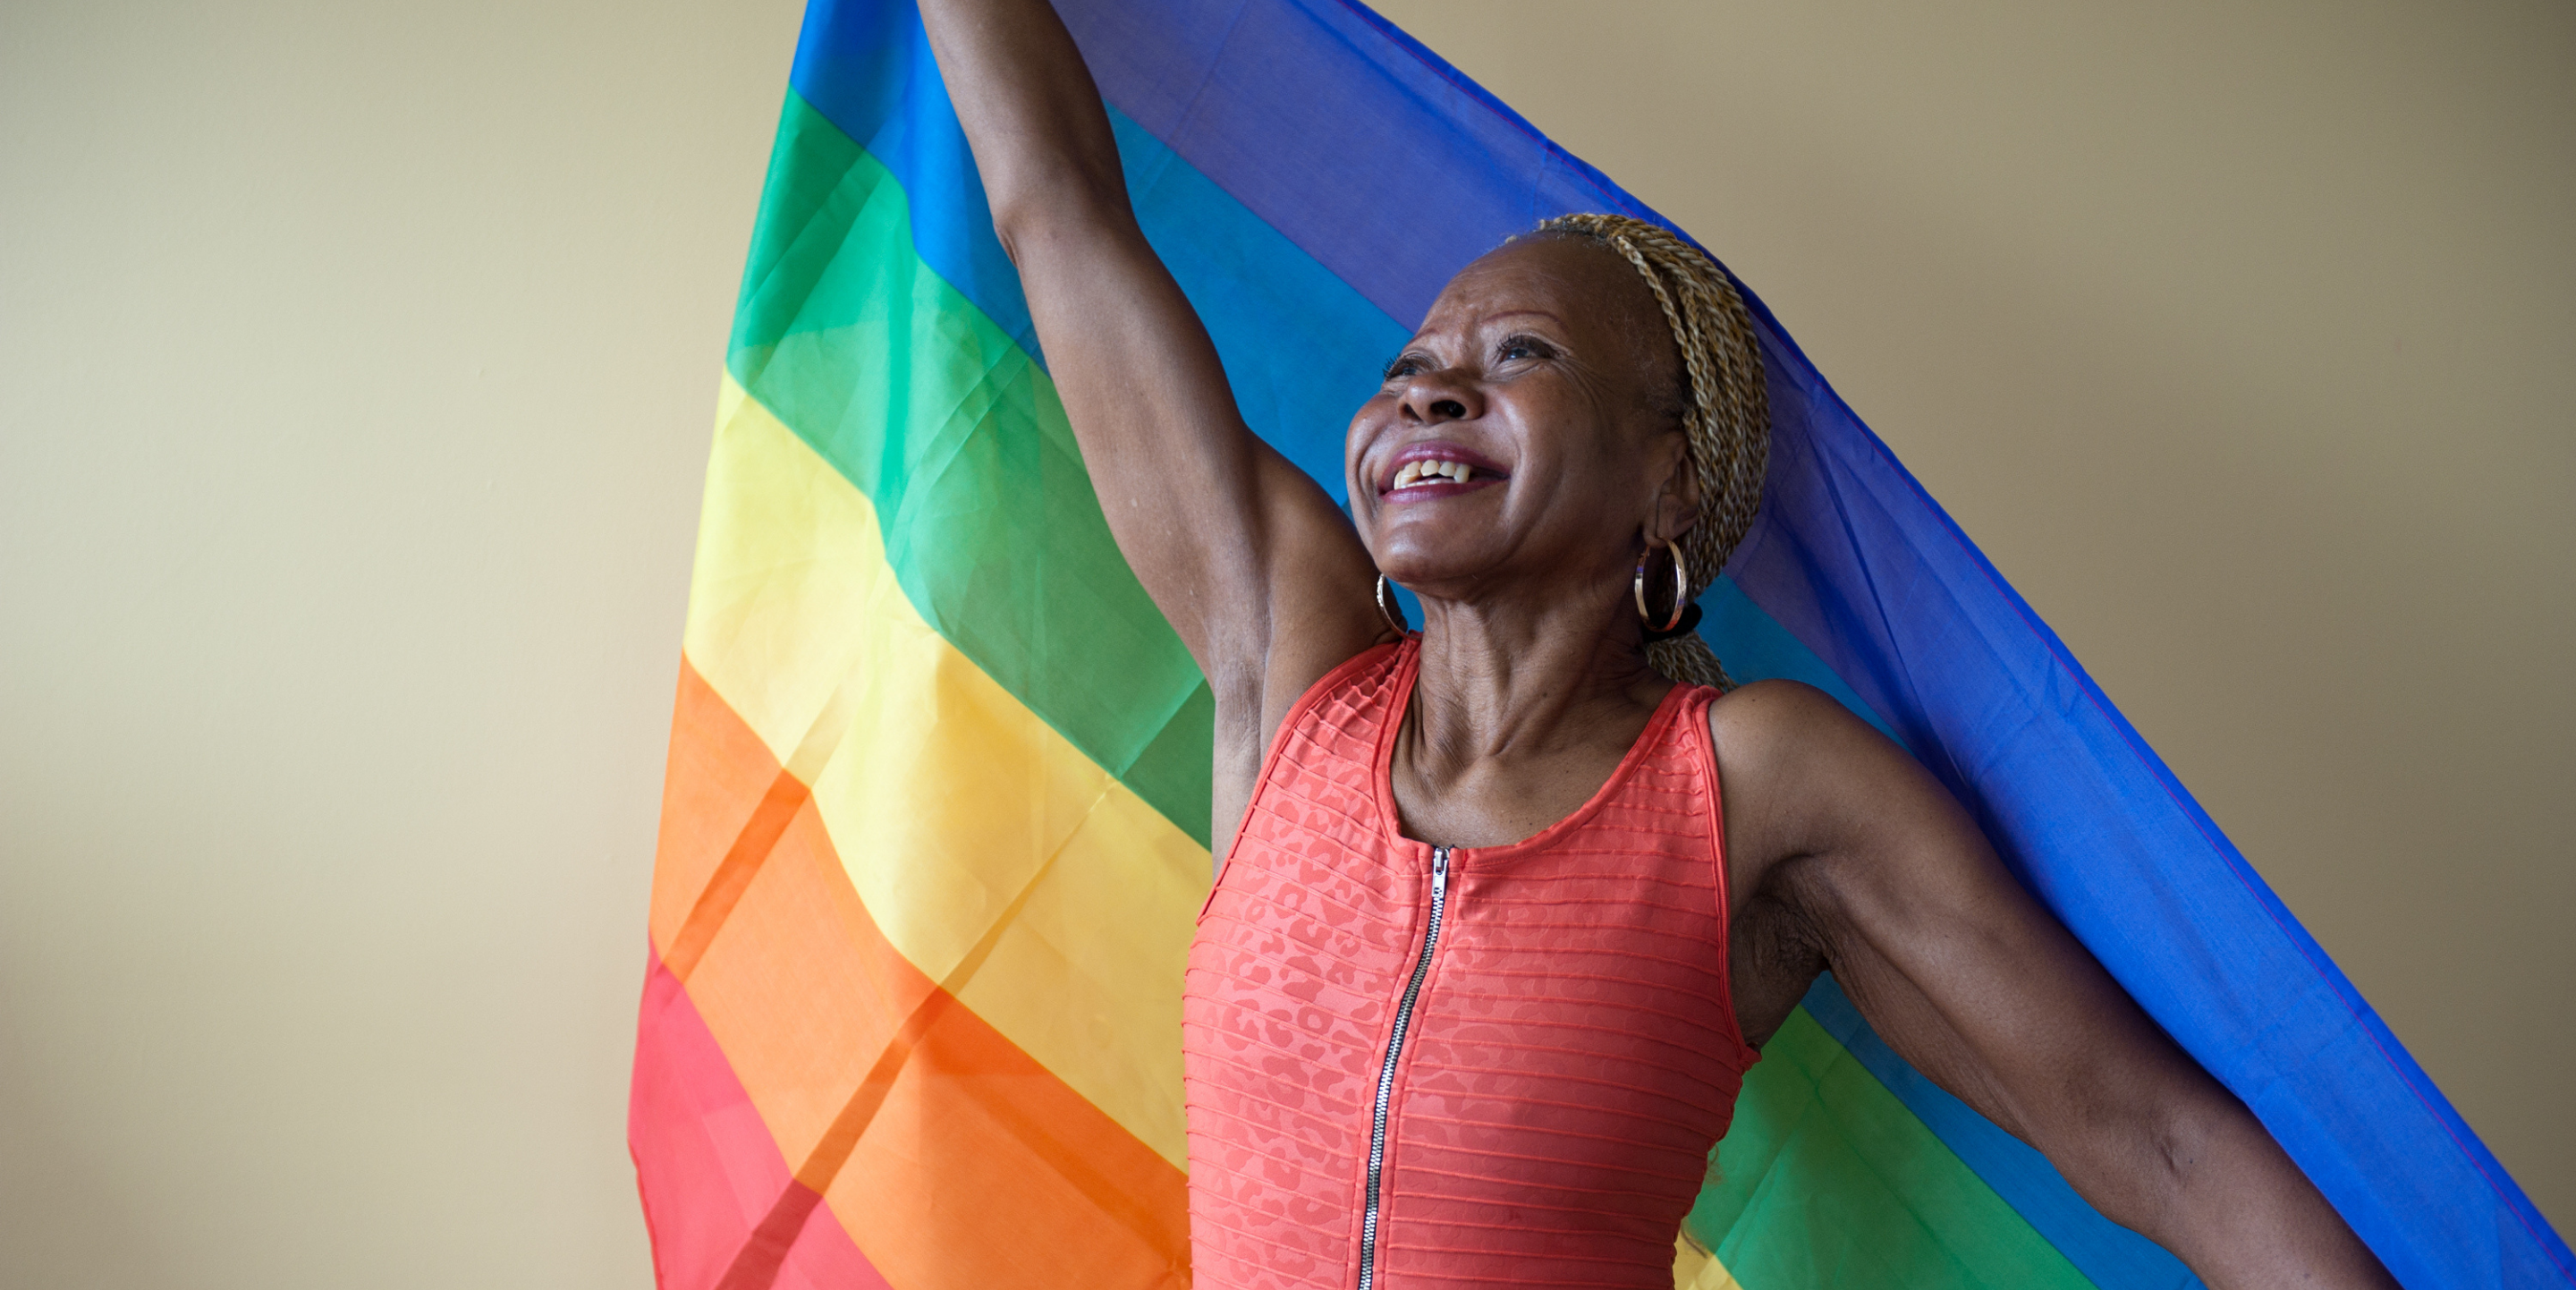 Aging in the LGBT community